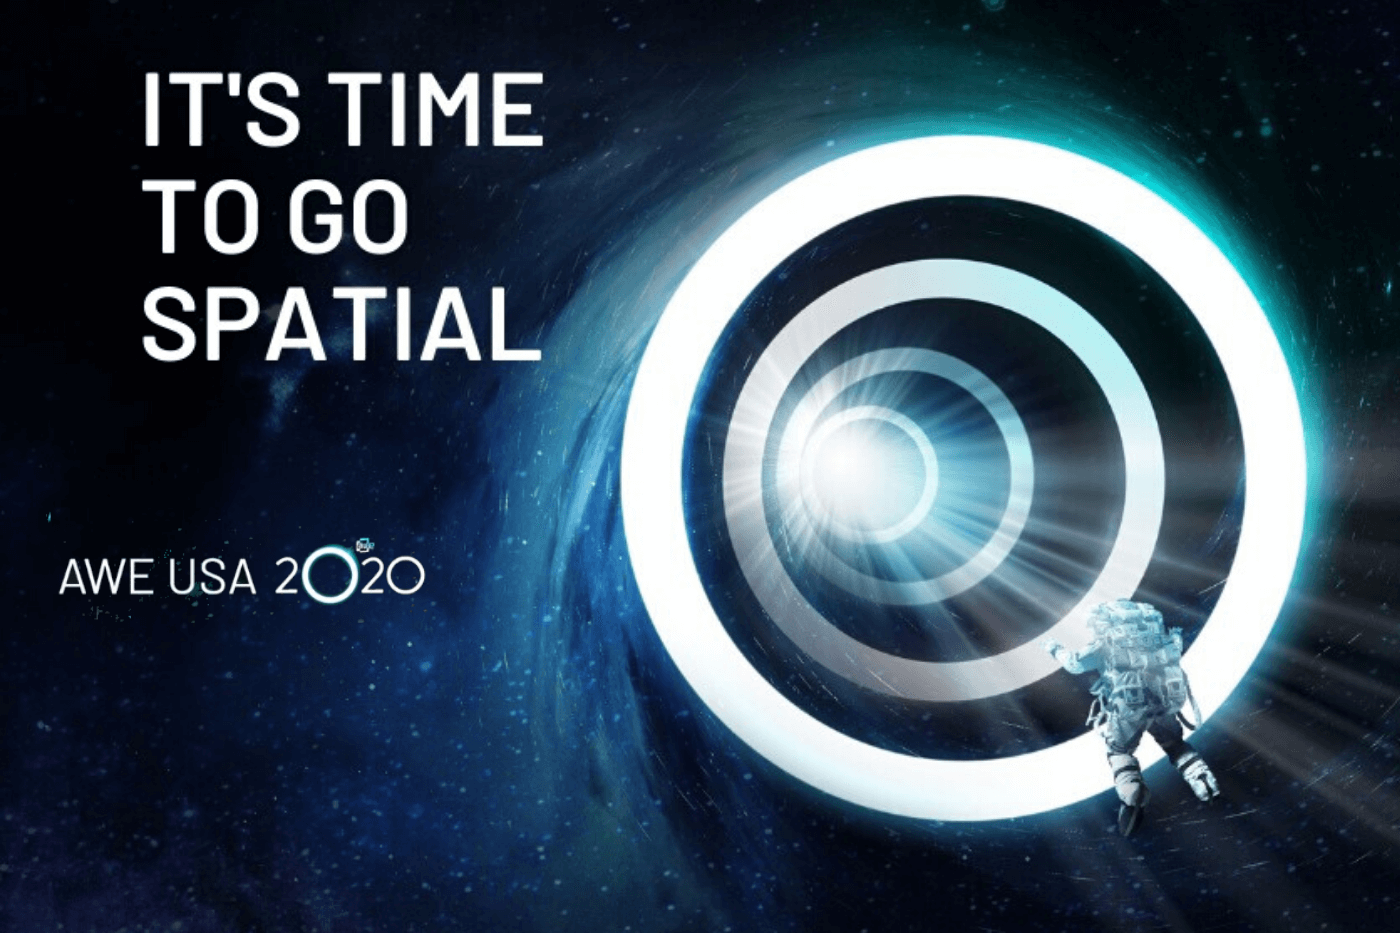 It’s Time to Go Spatial - Get Hyped and Get Tickets for AWE USA 2020